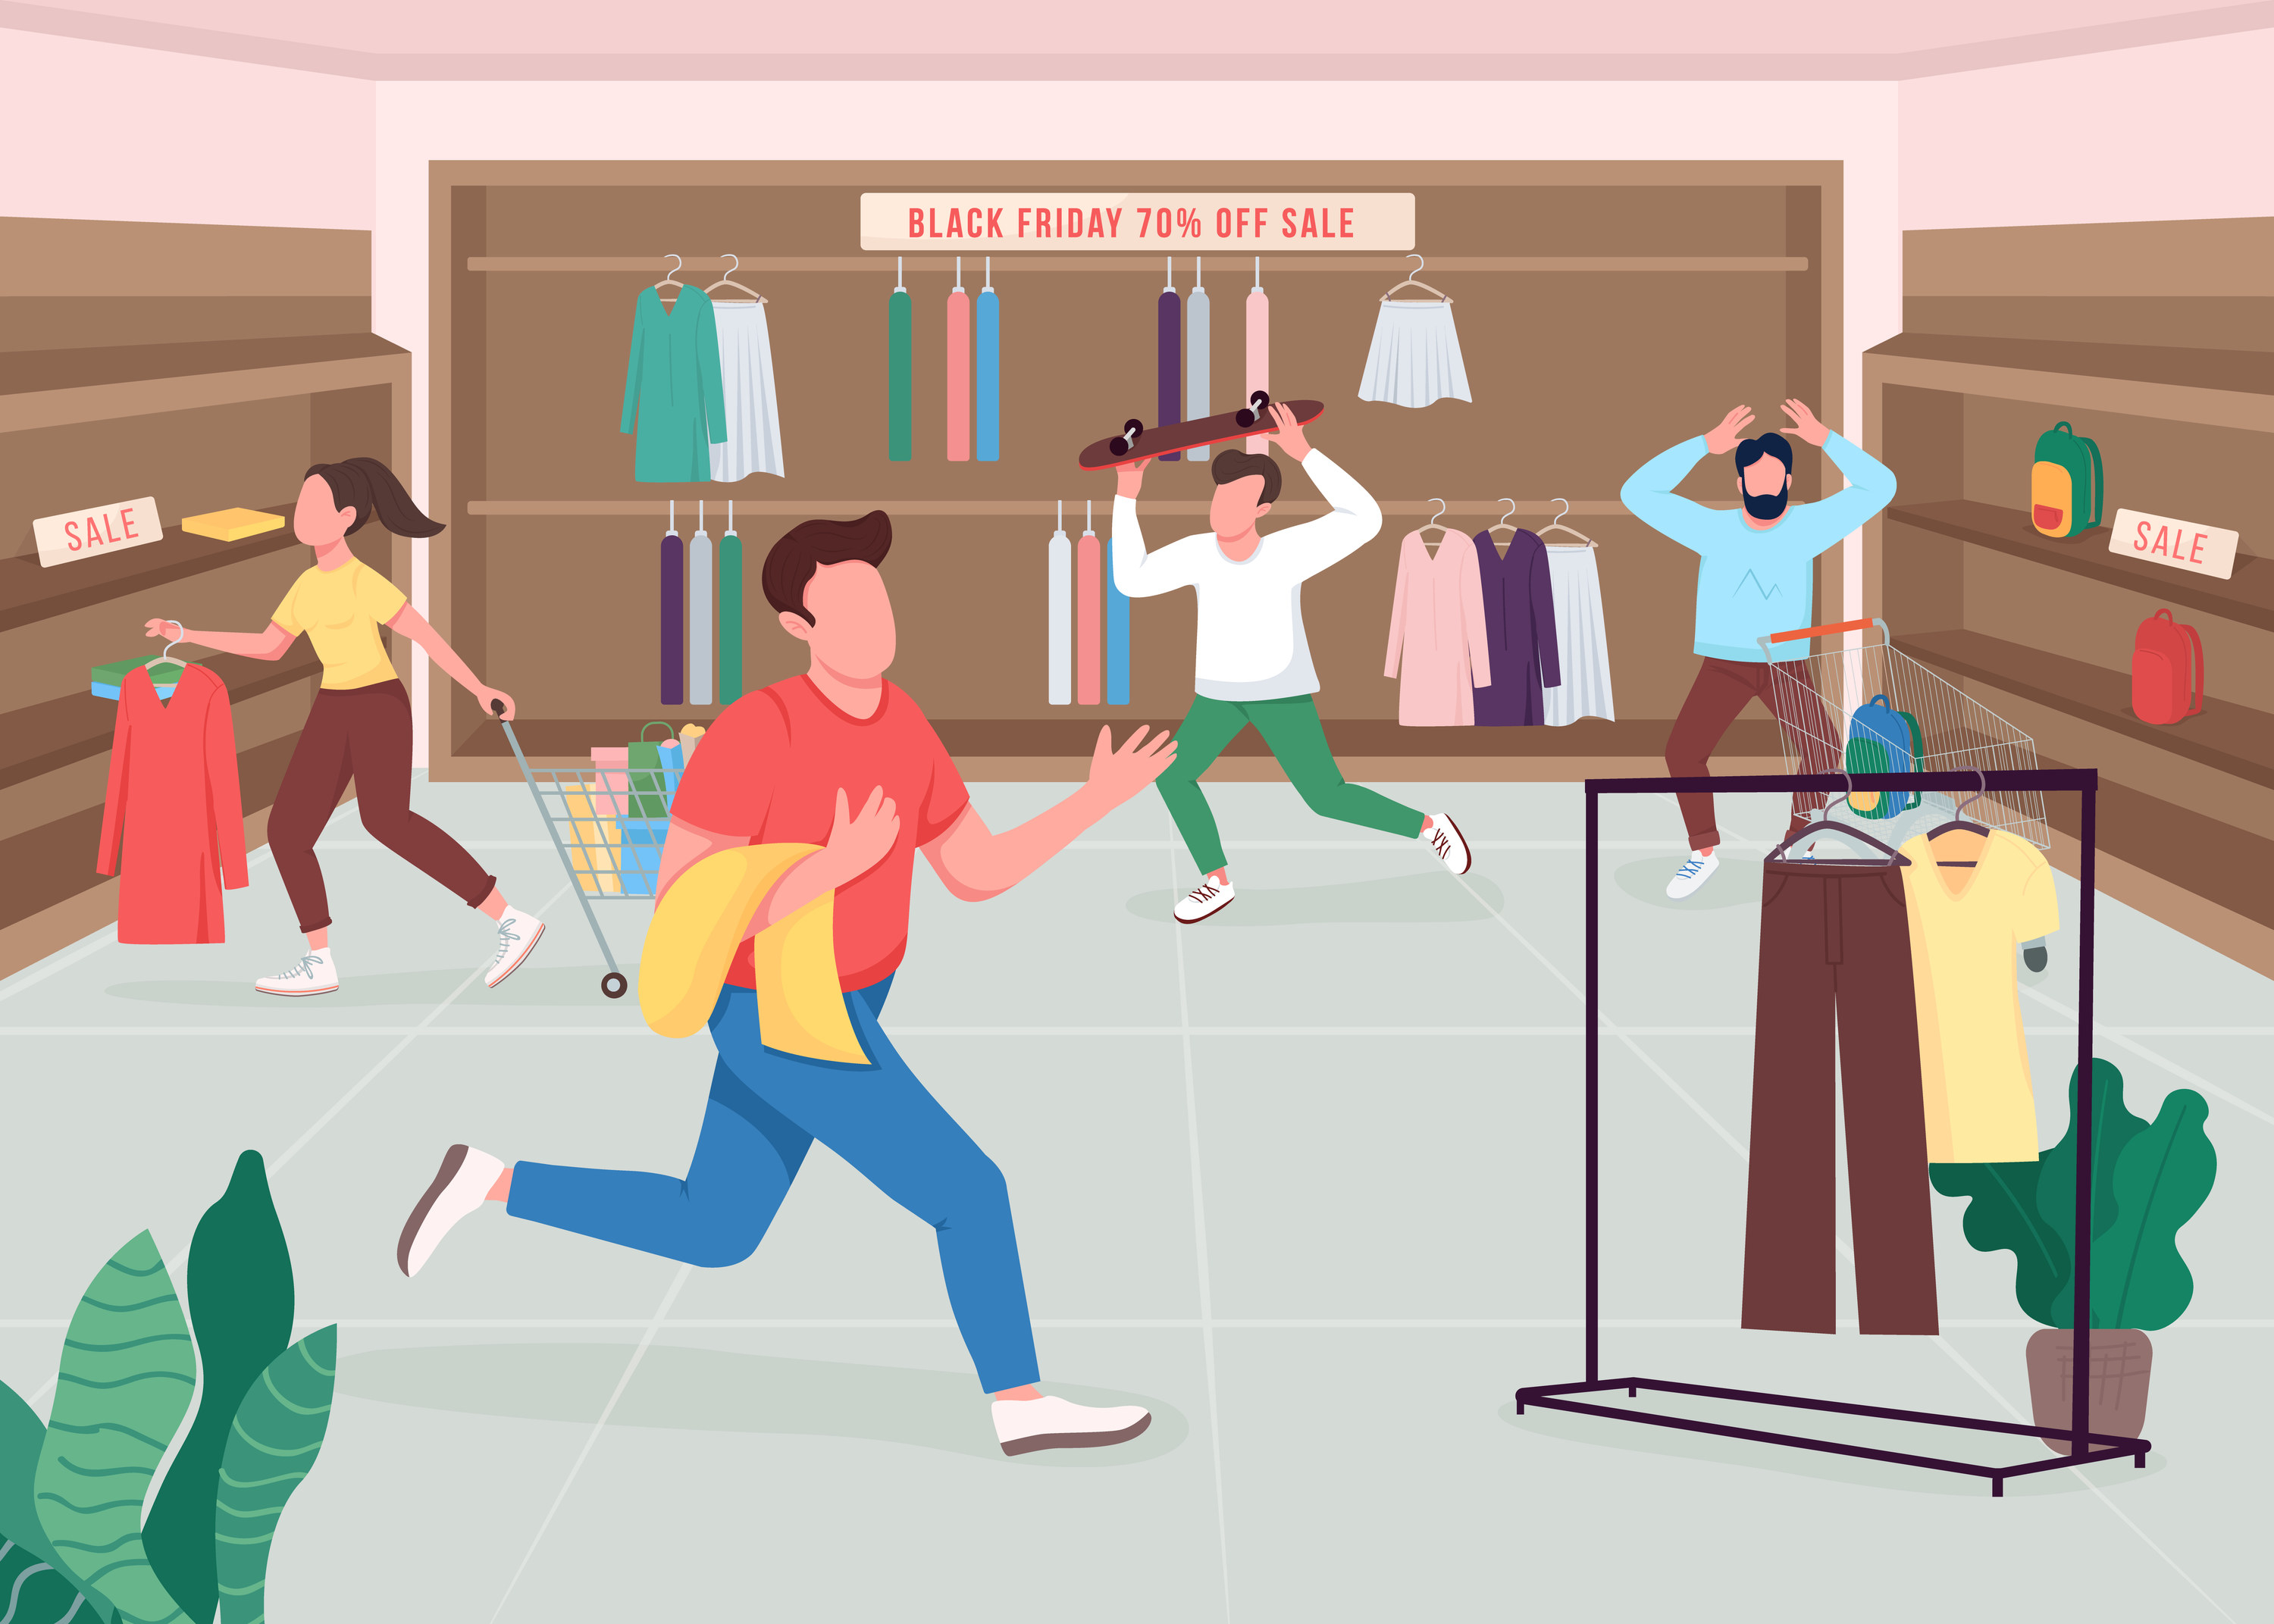 Illustration of people running around a store for &quot;Black Friday 70% off sale&quot;